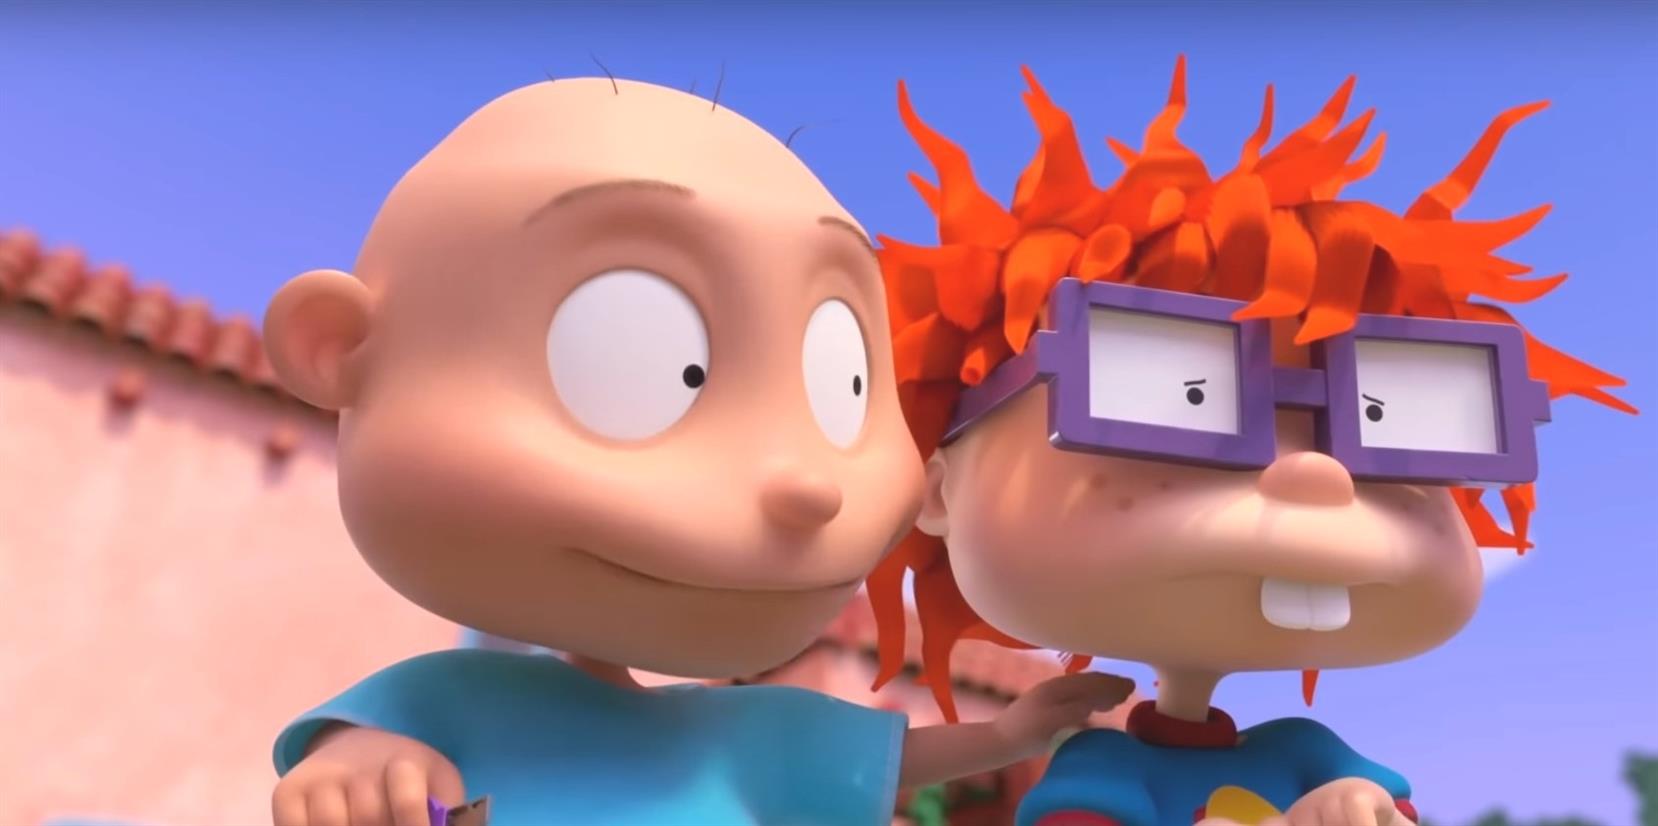 Dove vedere Rugrats in streaming wgPnH 1 1